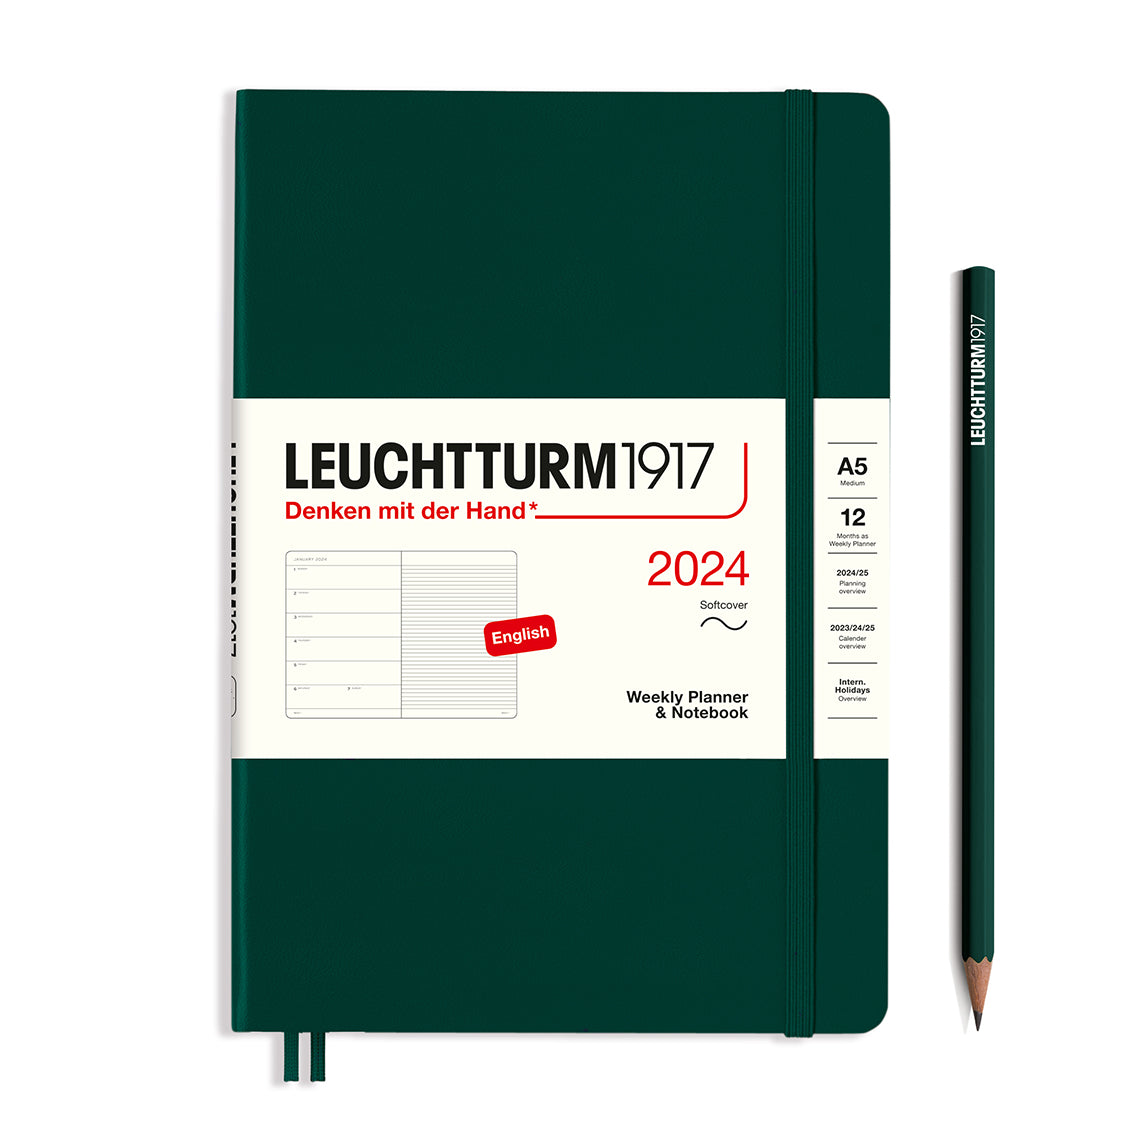 An image of a dark green planner with a dark green elastic band holding it together and a cream paper wrap around the middle stating the business name Leuchtturm1917, that it is for the year 2024, it is a weekly planner and notebook, is A5 in size and an English language version. It has an image on the wrap showing the inside layout which is a week on the left hand page and a notes page on thr right hand page. A dark green pencil is shown at the side of the planner.